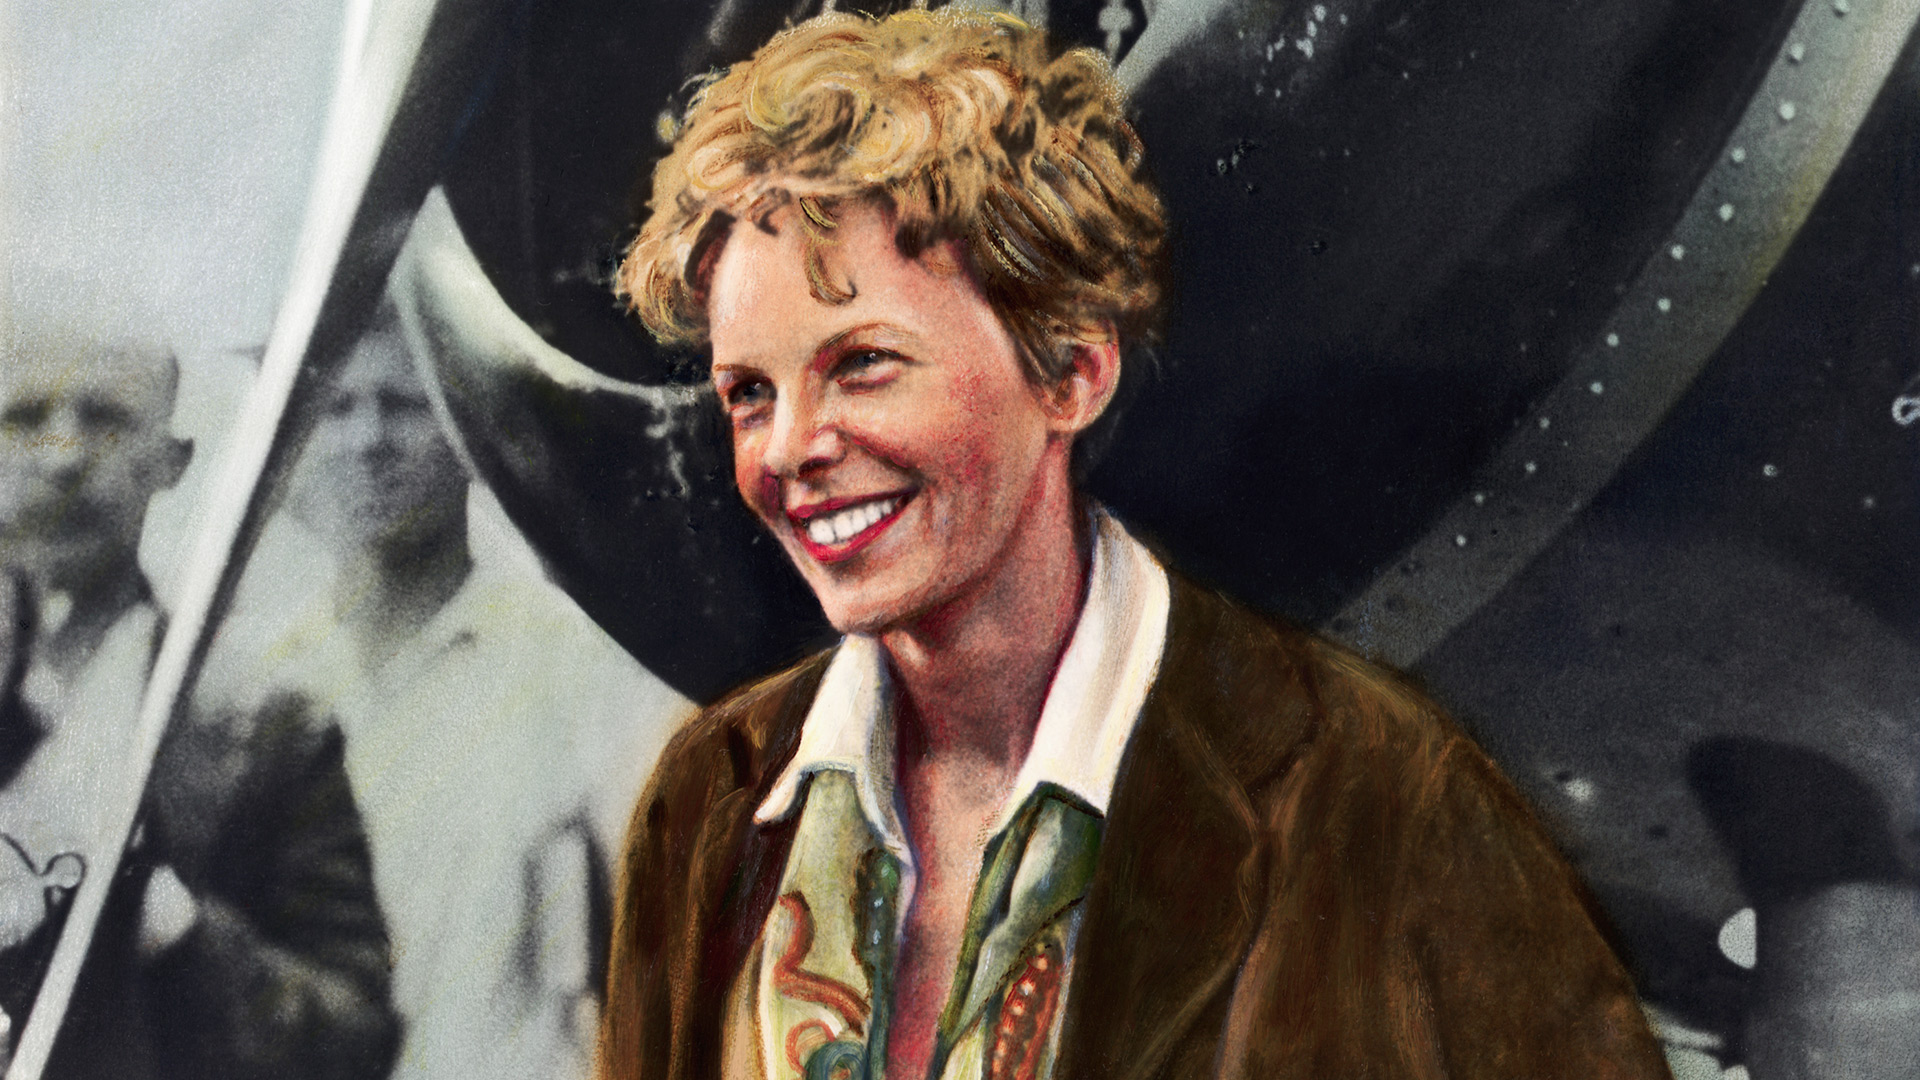 August 24, 1932: Amelia Earhart Was the First Woman to Fly Non-Stop